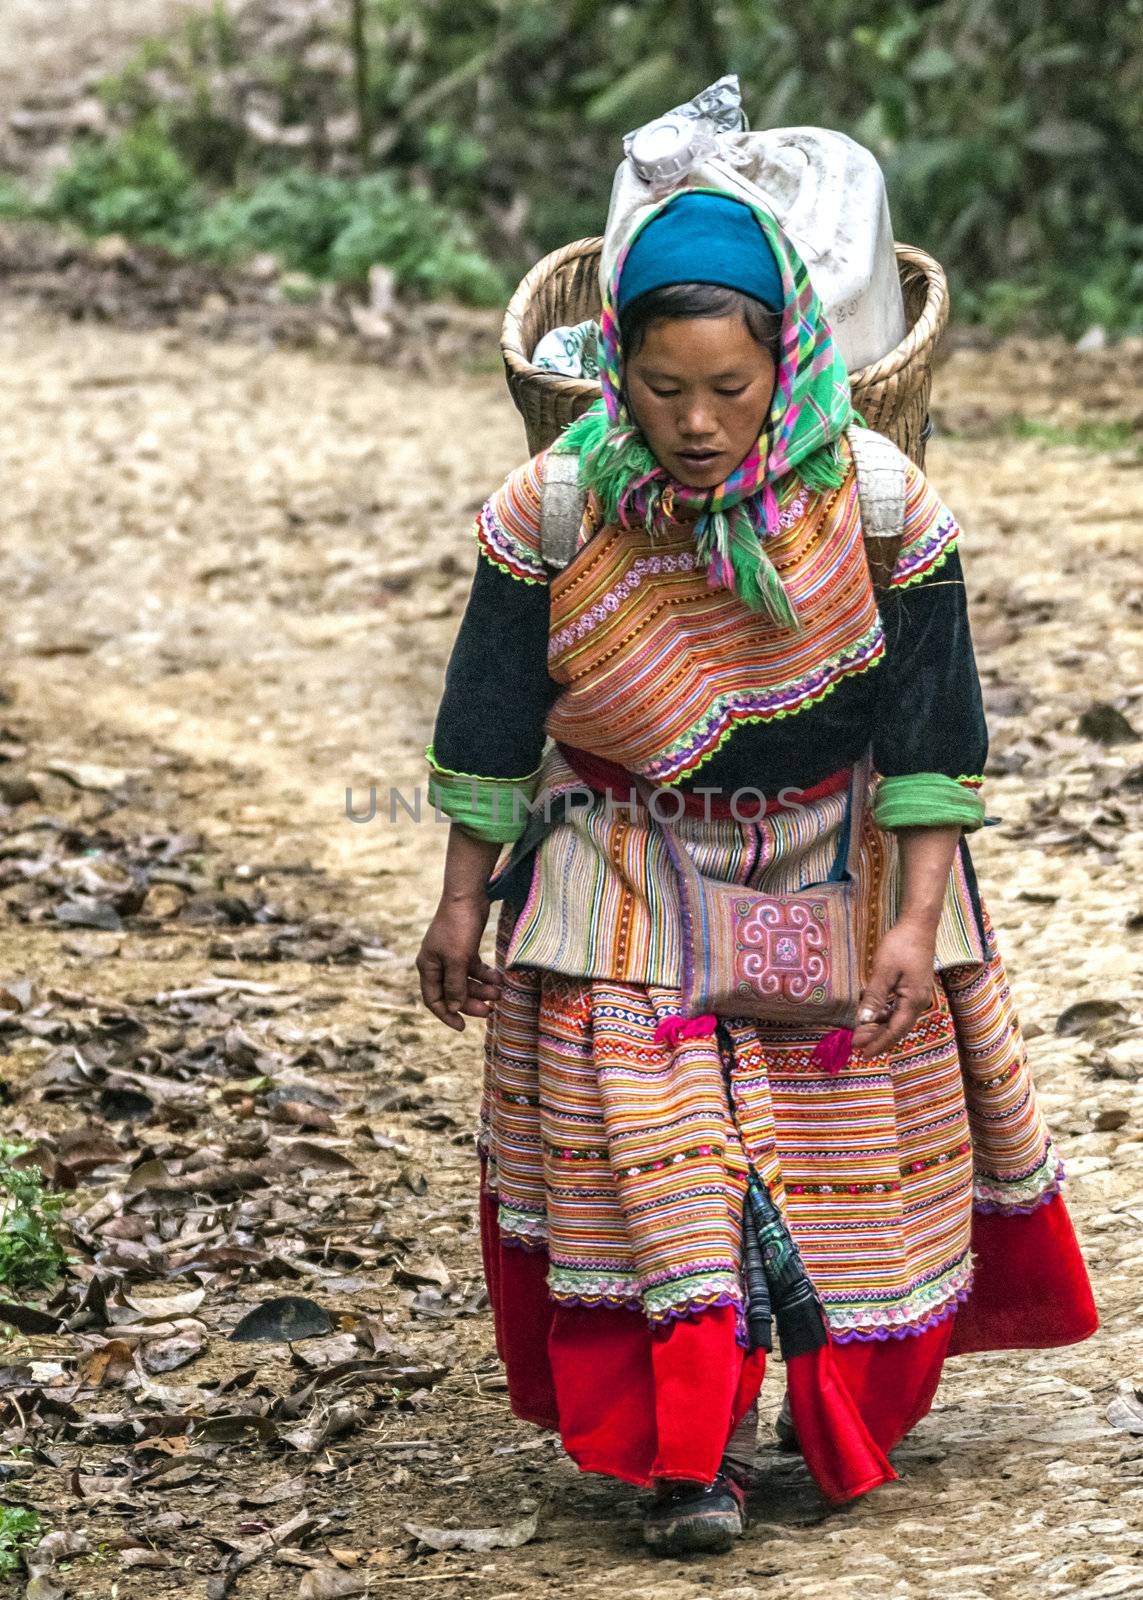 Vietnam Ban Pho - March 2012: Hmong woman with loaded basket on  by Claudine